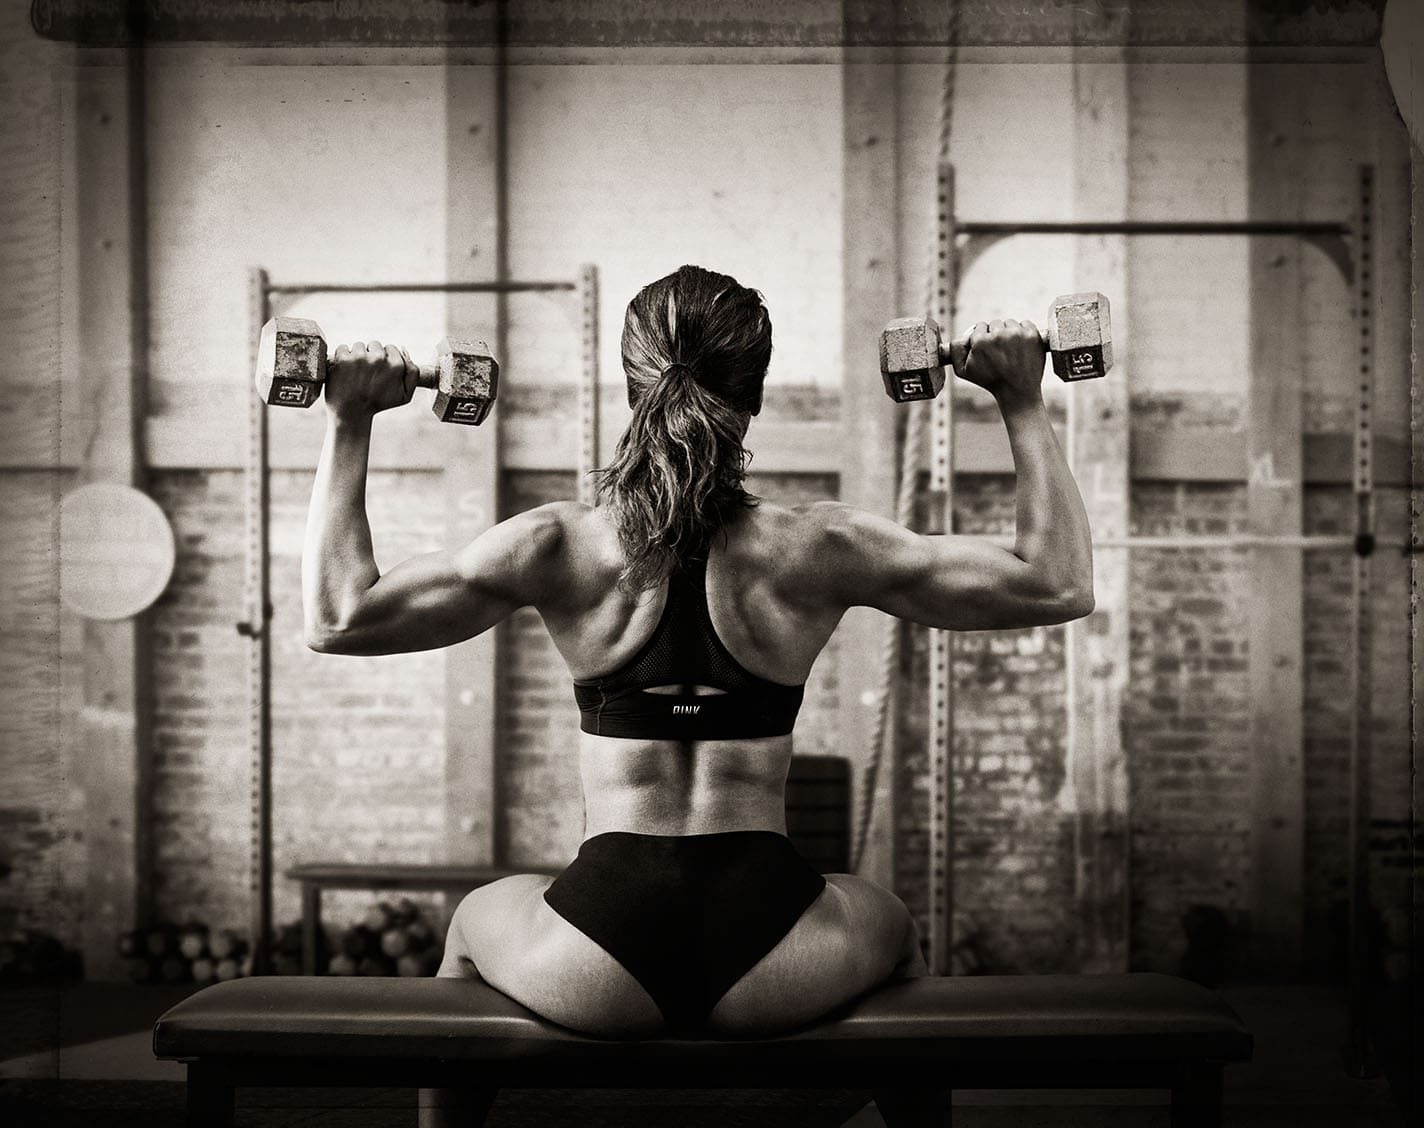 Black and White Image Behind Athlete Nicole Harris Doing Shoulder Press Two Piece Workout Apparel Chanel